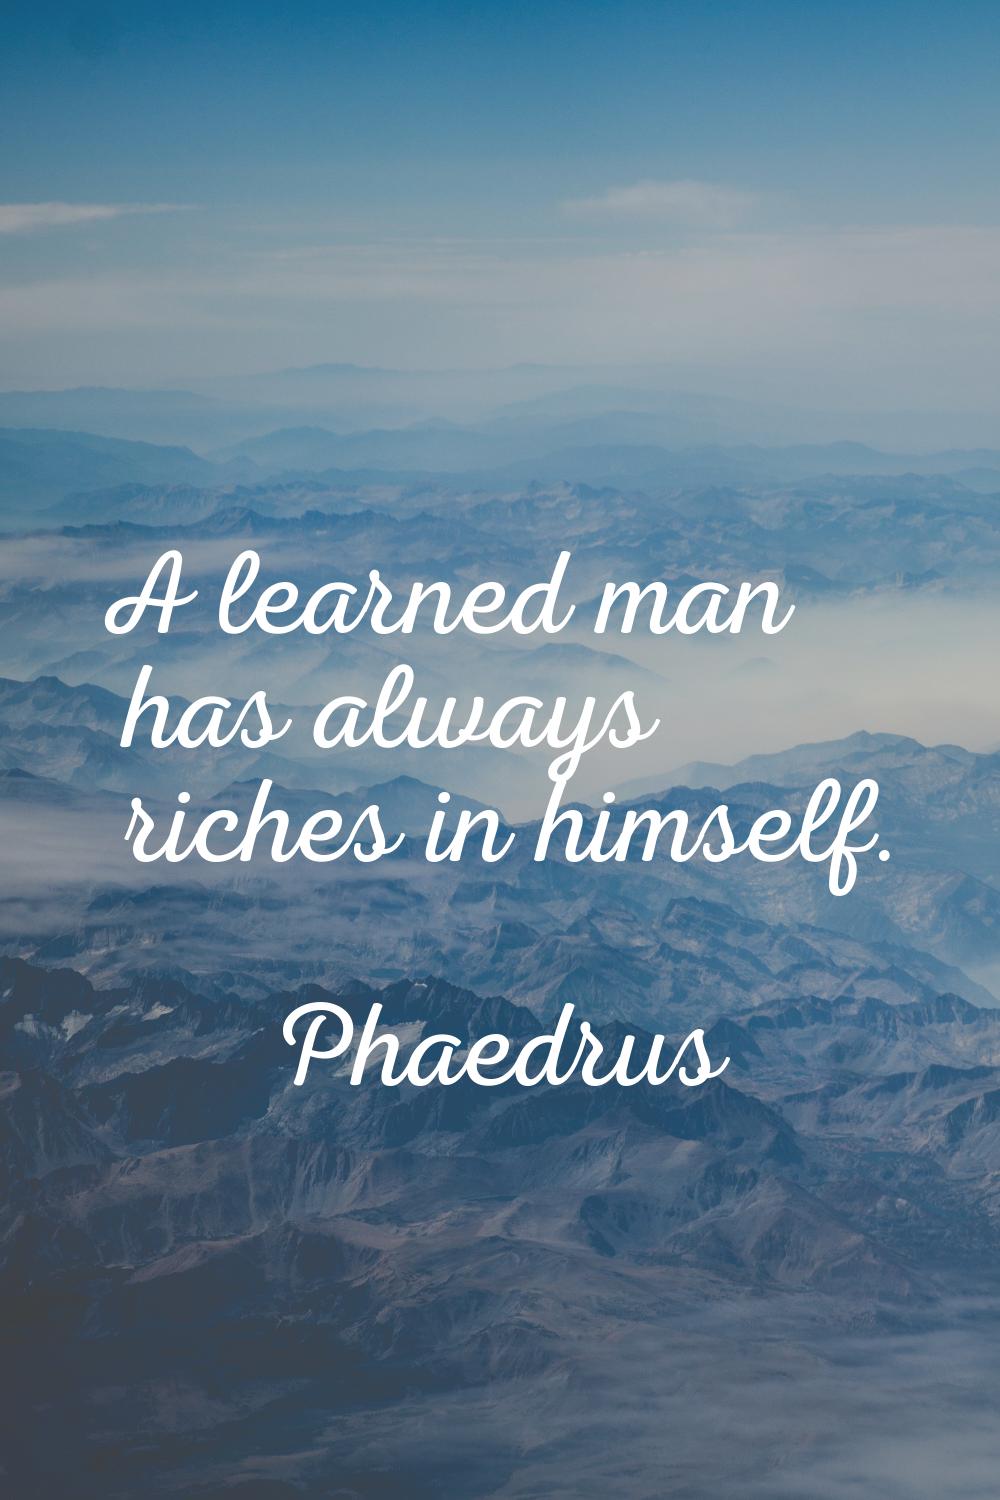 A learned man has always riches in himself.